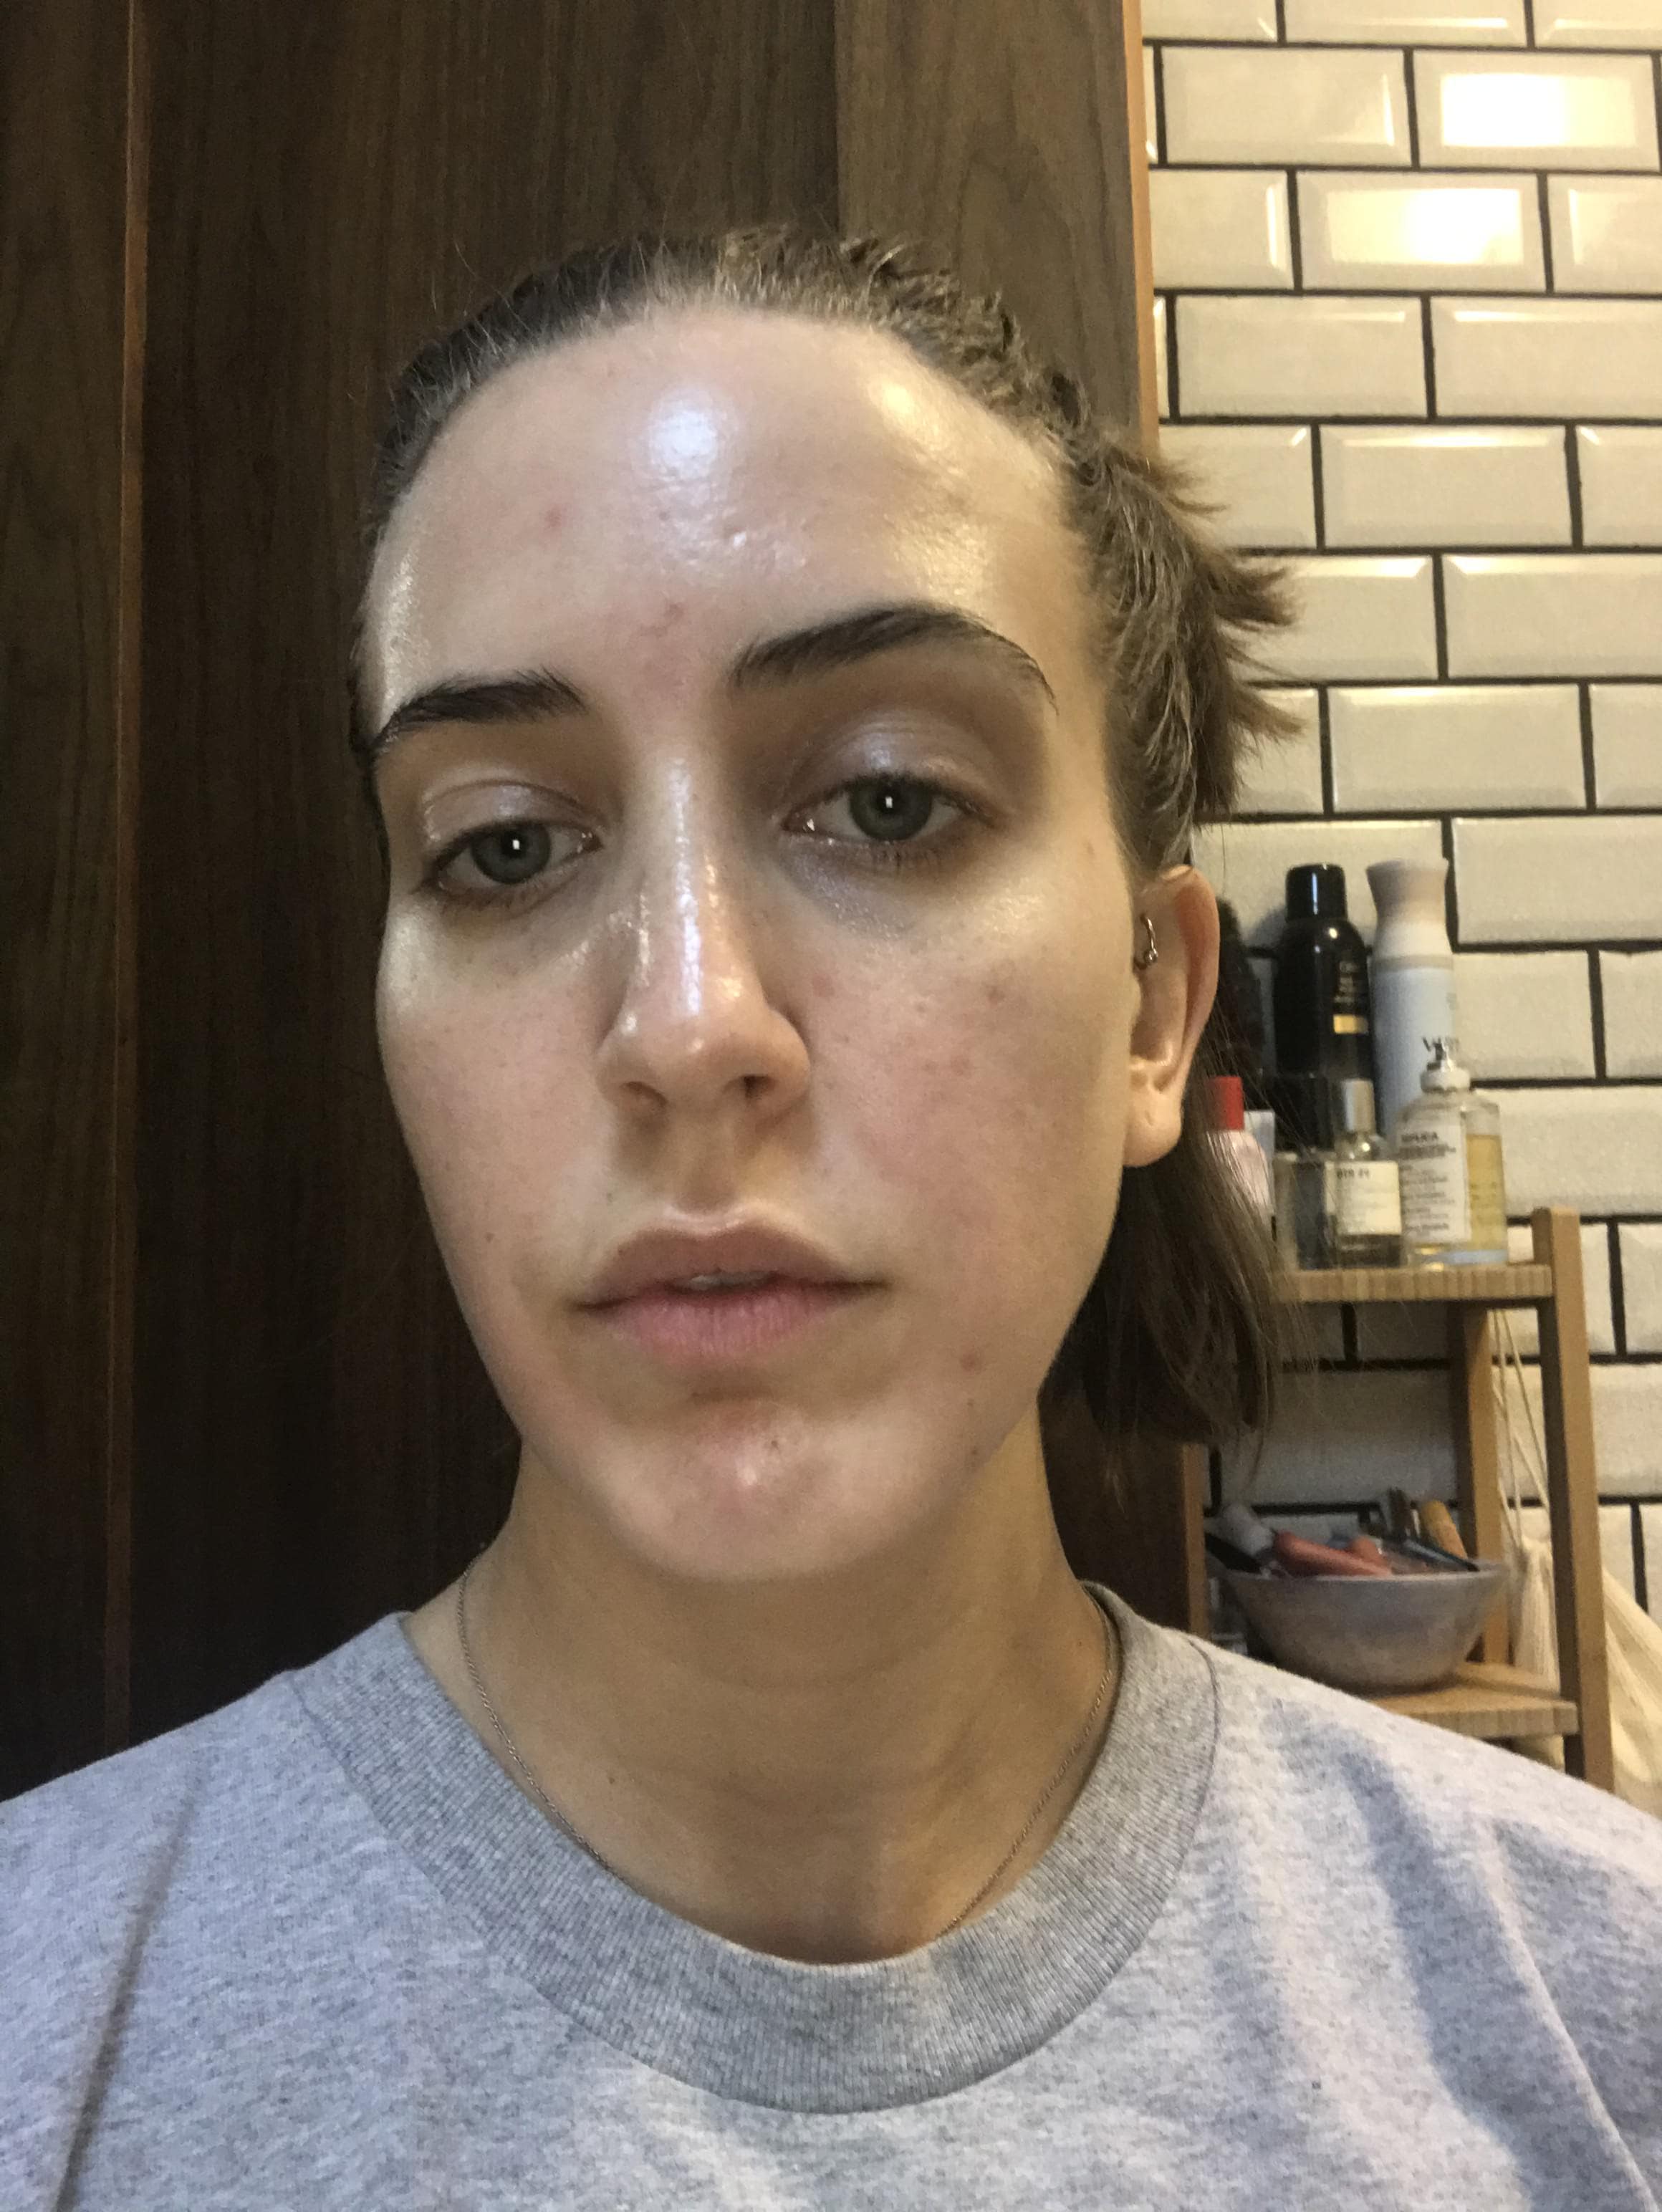 2 hours after the facial